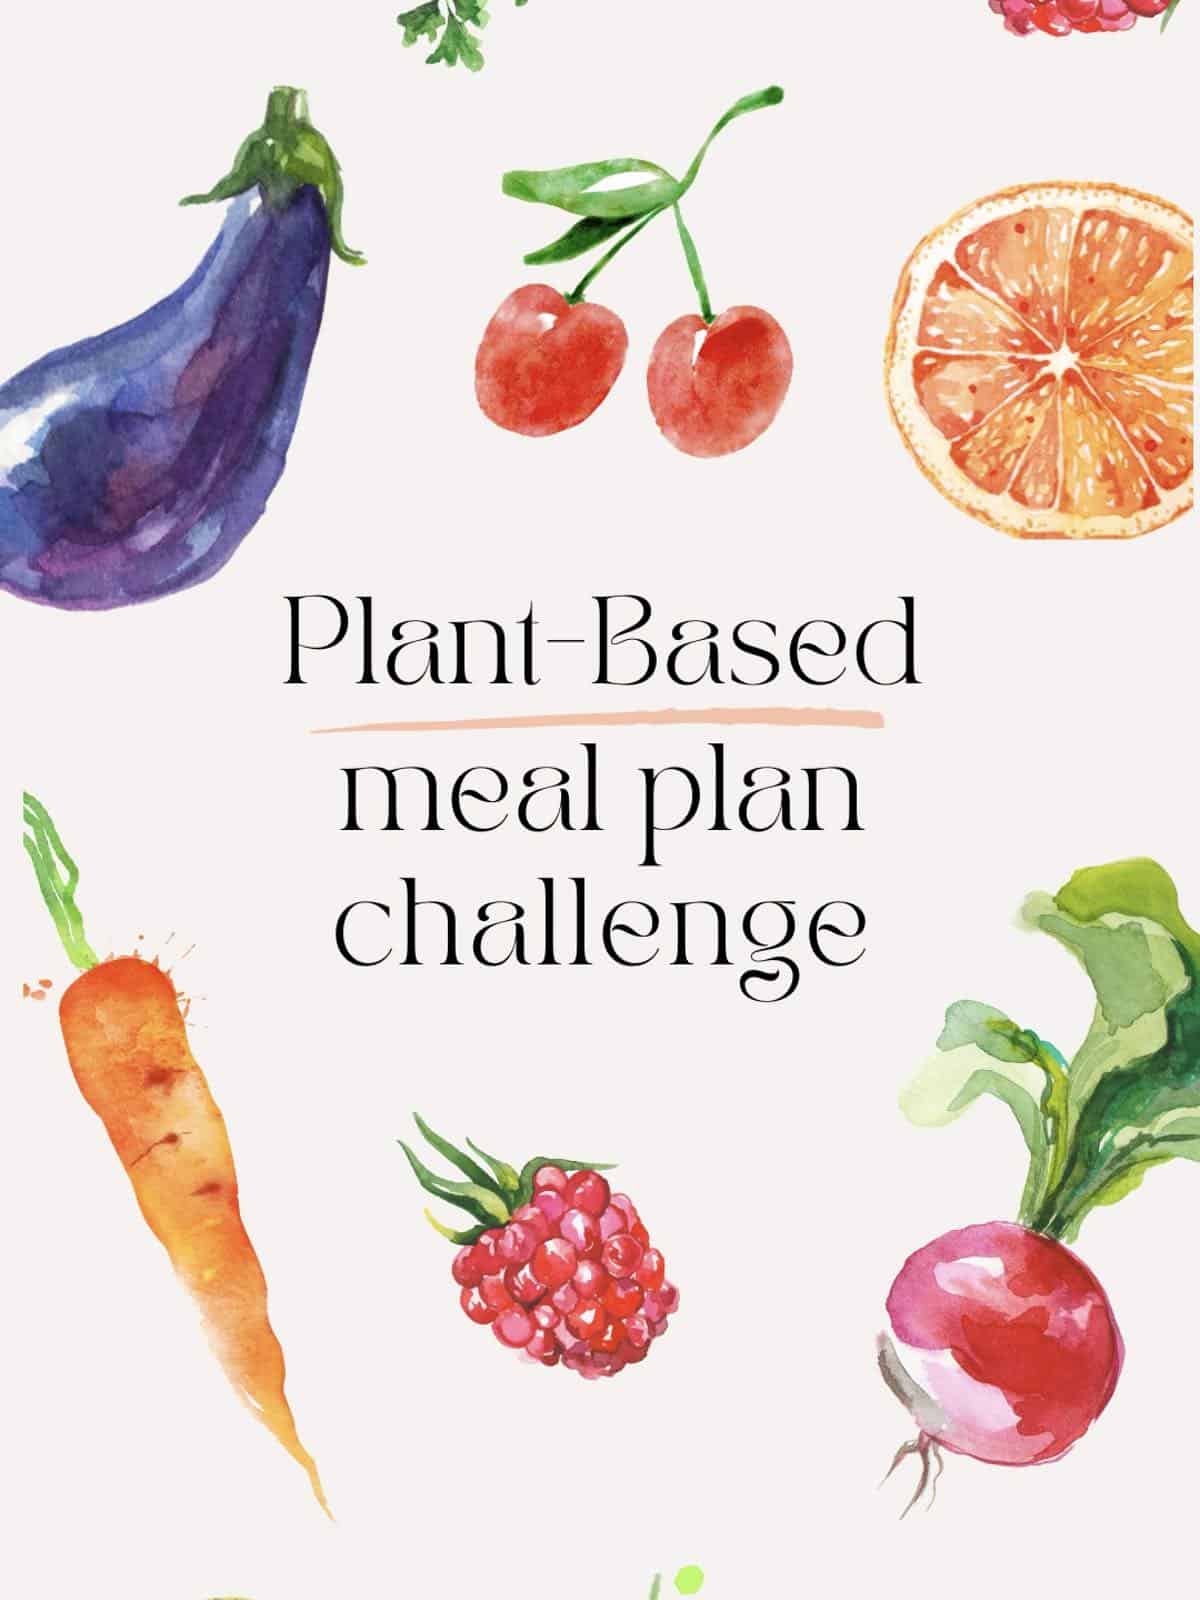 Plant based meal plan challenge flyer with fruits and veggies. 